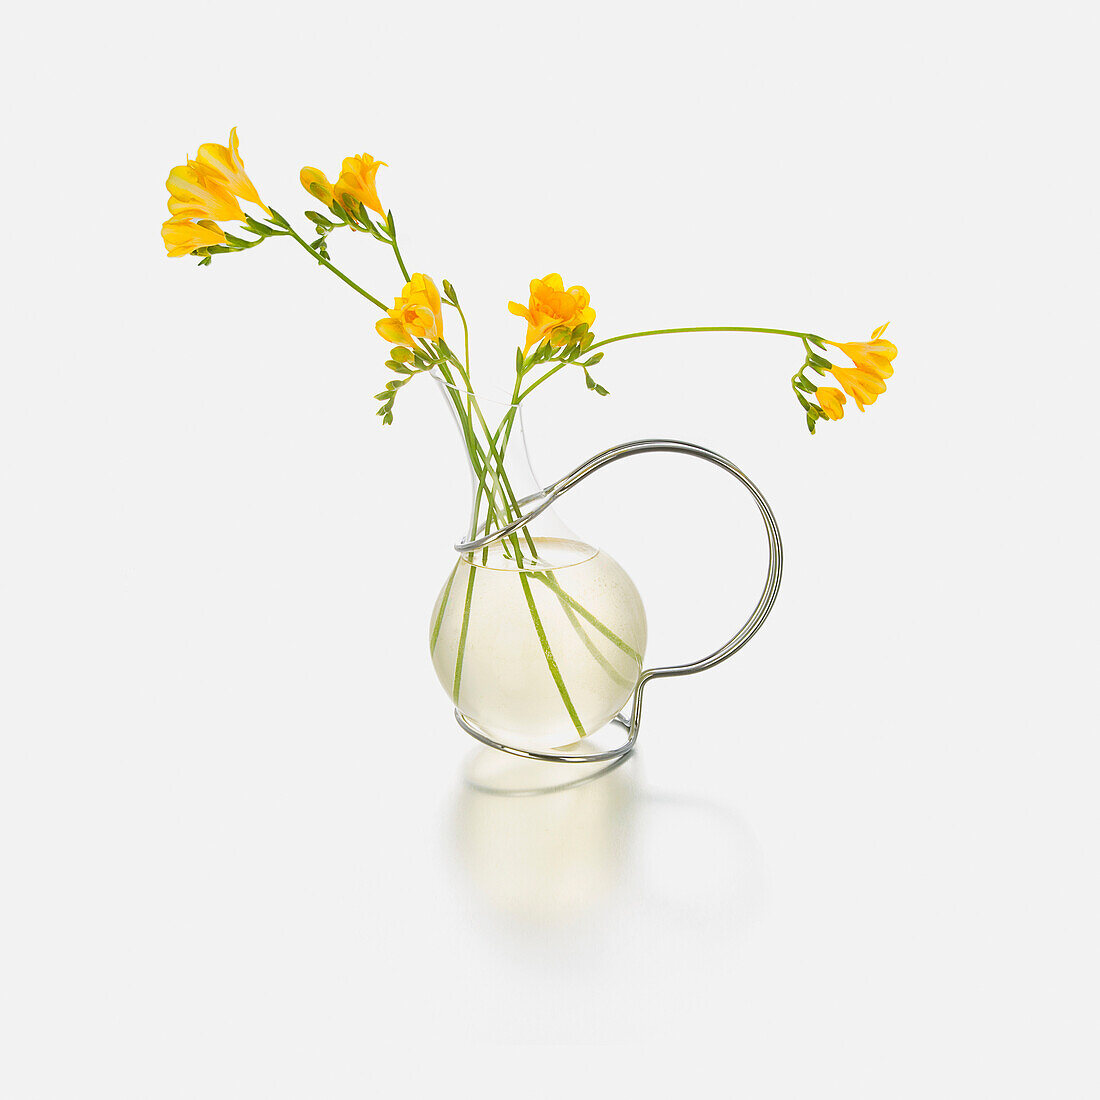 Yellow flowers in a glass vase against a white background